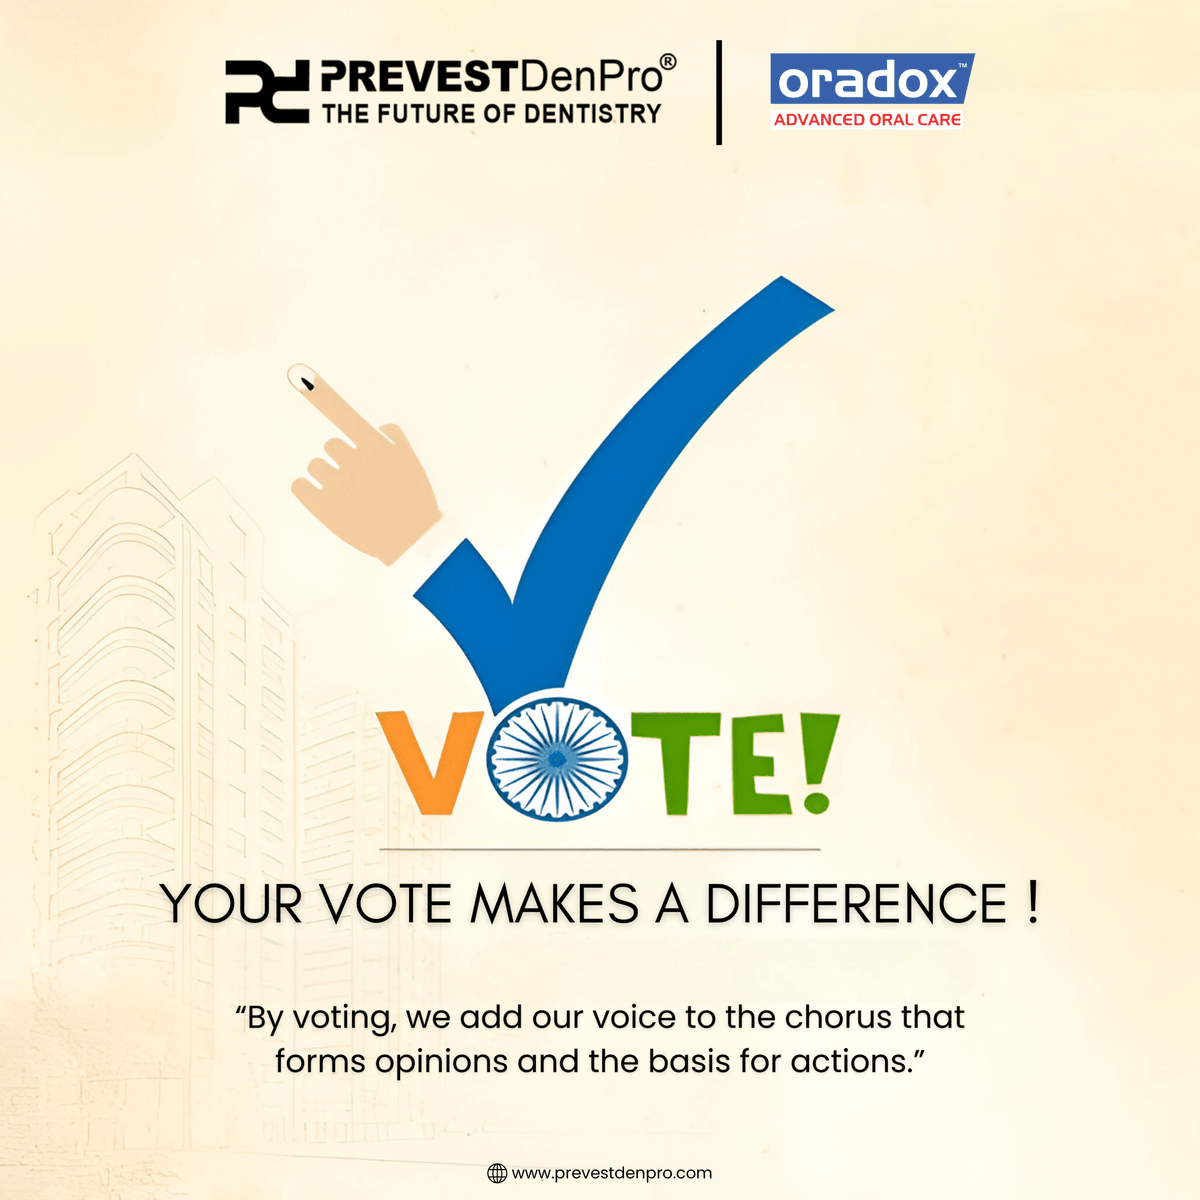 Voting for the 18th Lok Sabha has officially started today. Democracy thrives when citizens actively participate. Register, vote, and contribute to the strength of our democracy.

#prevestdenpro #yourvotematters #loksabha #democracy